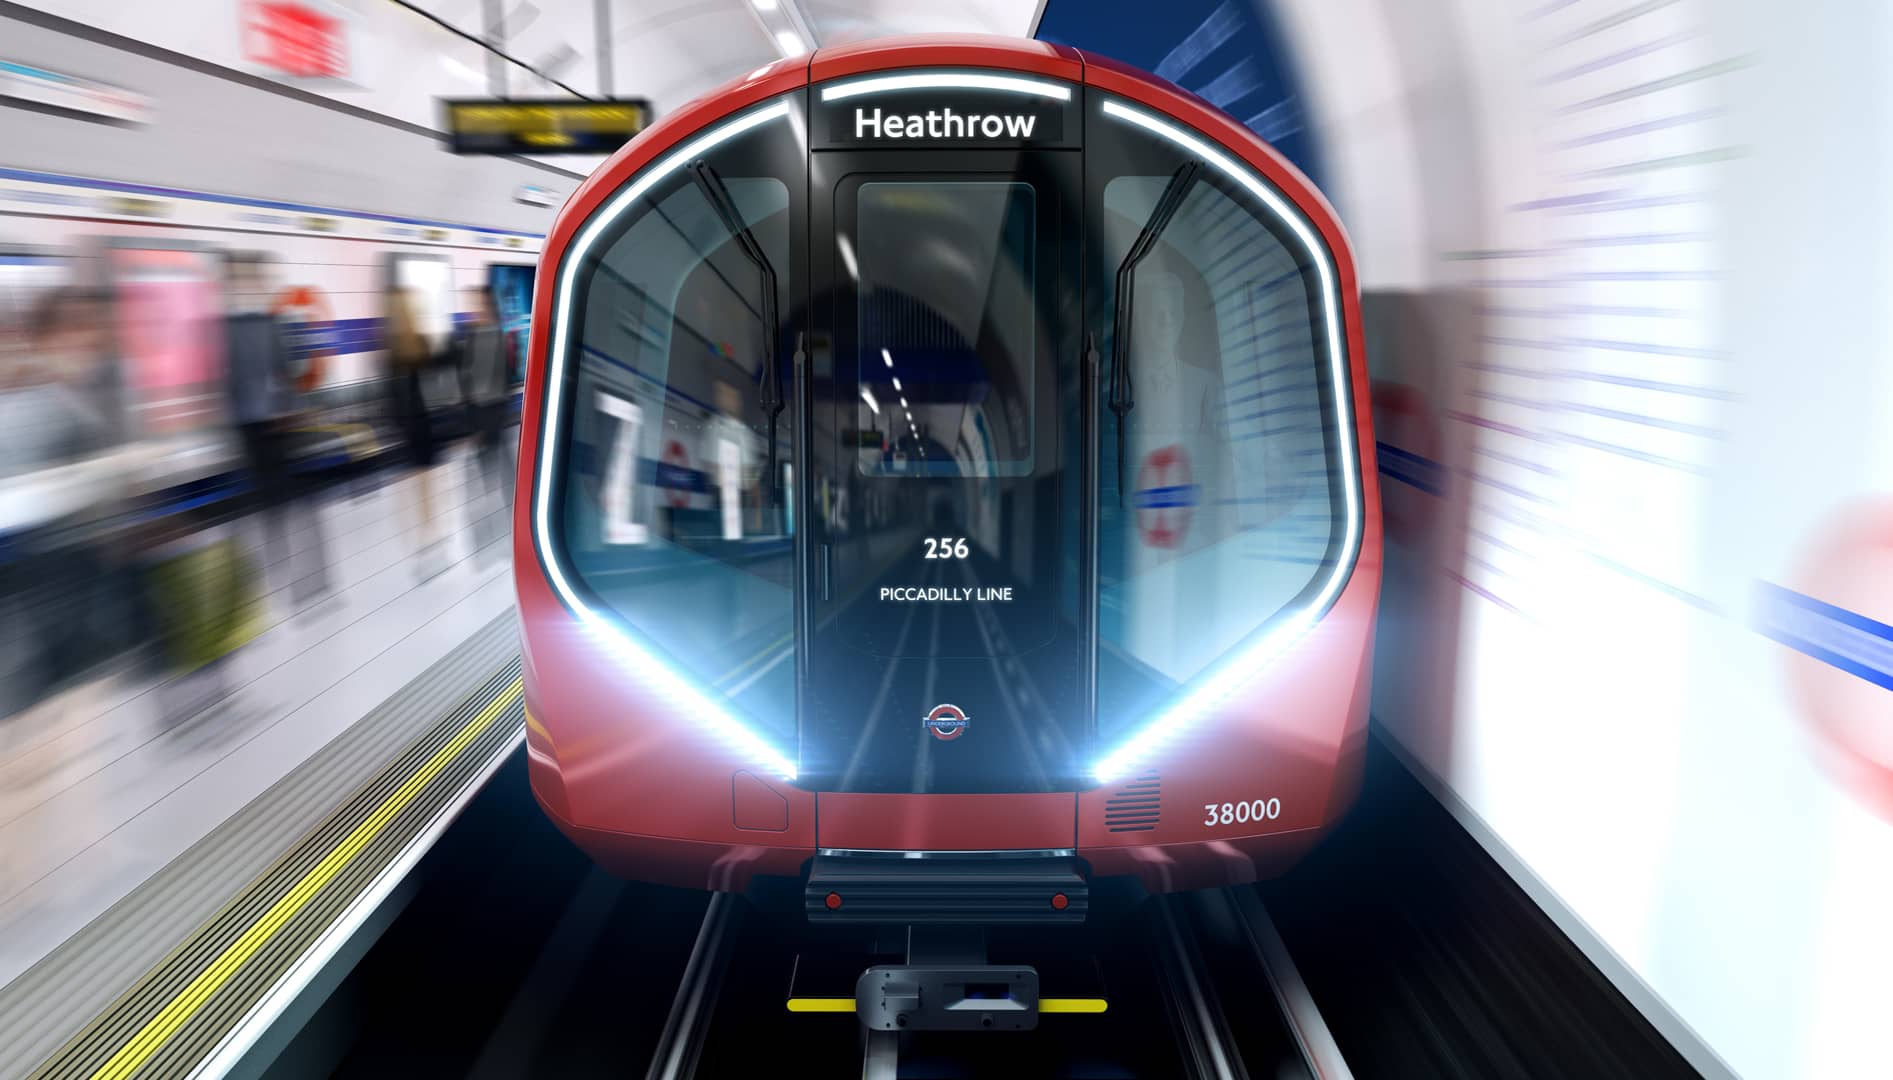 New Tube for London designed by PriestmanGoode. on Vimeo